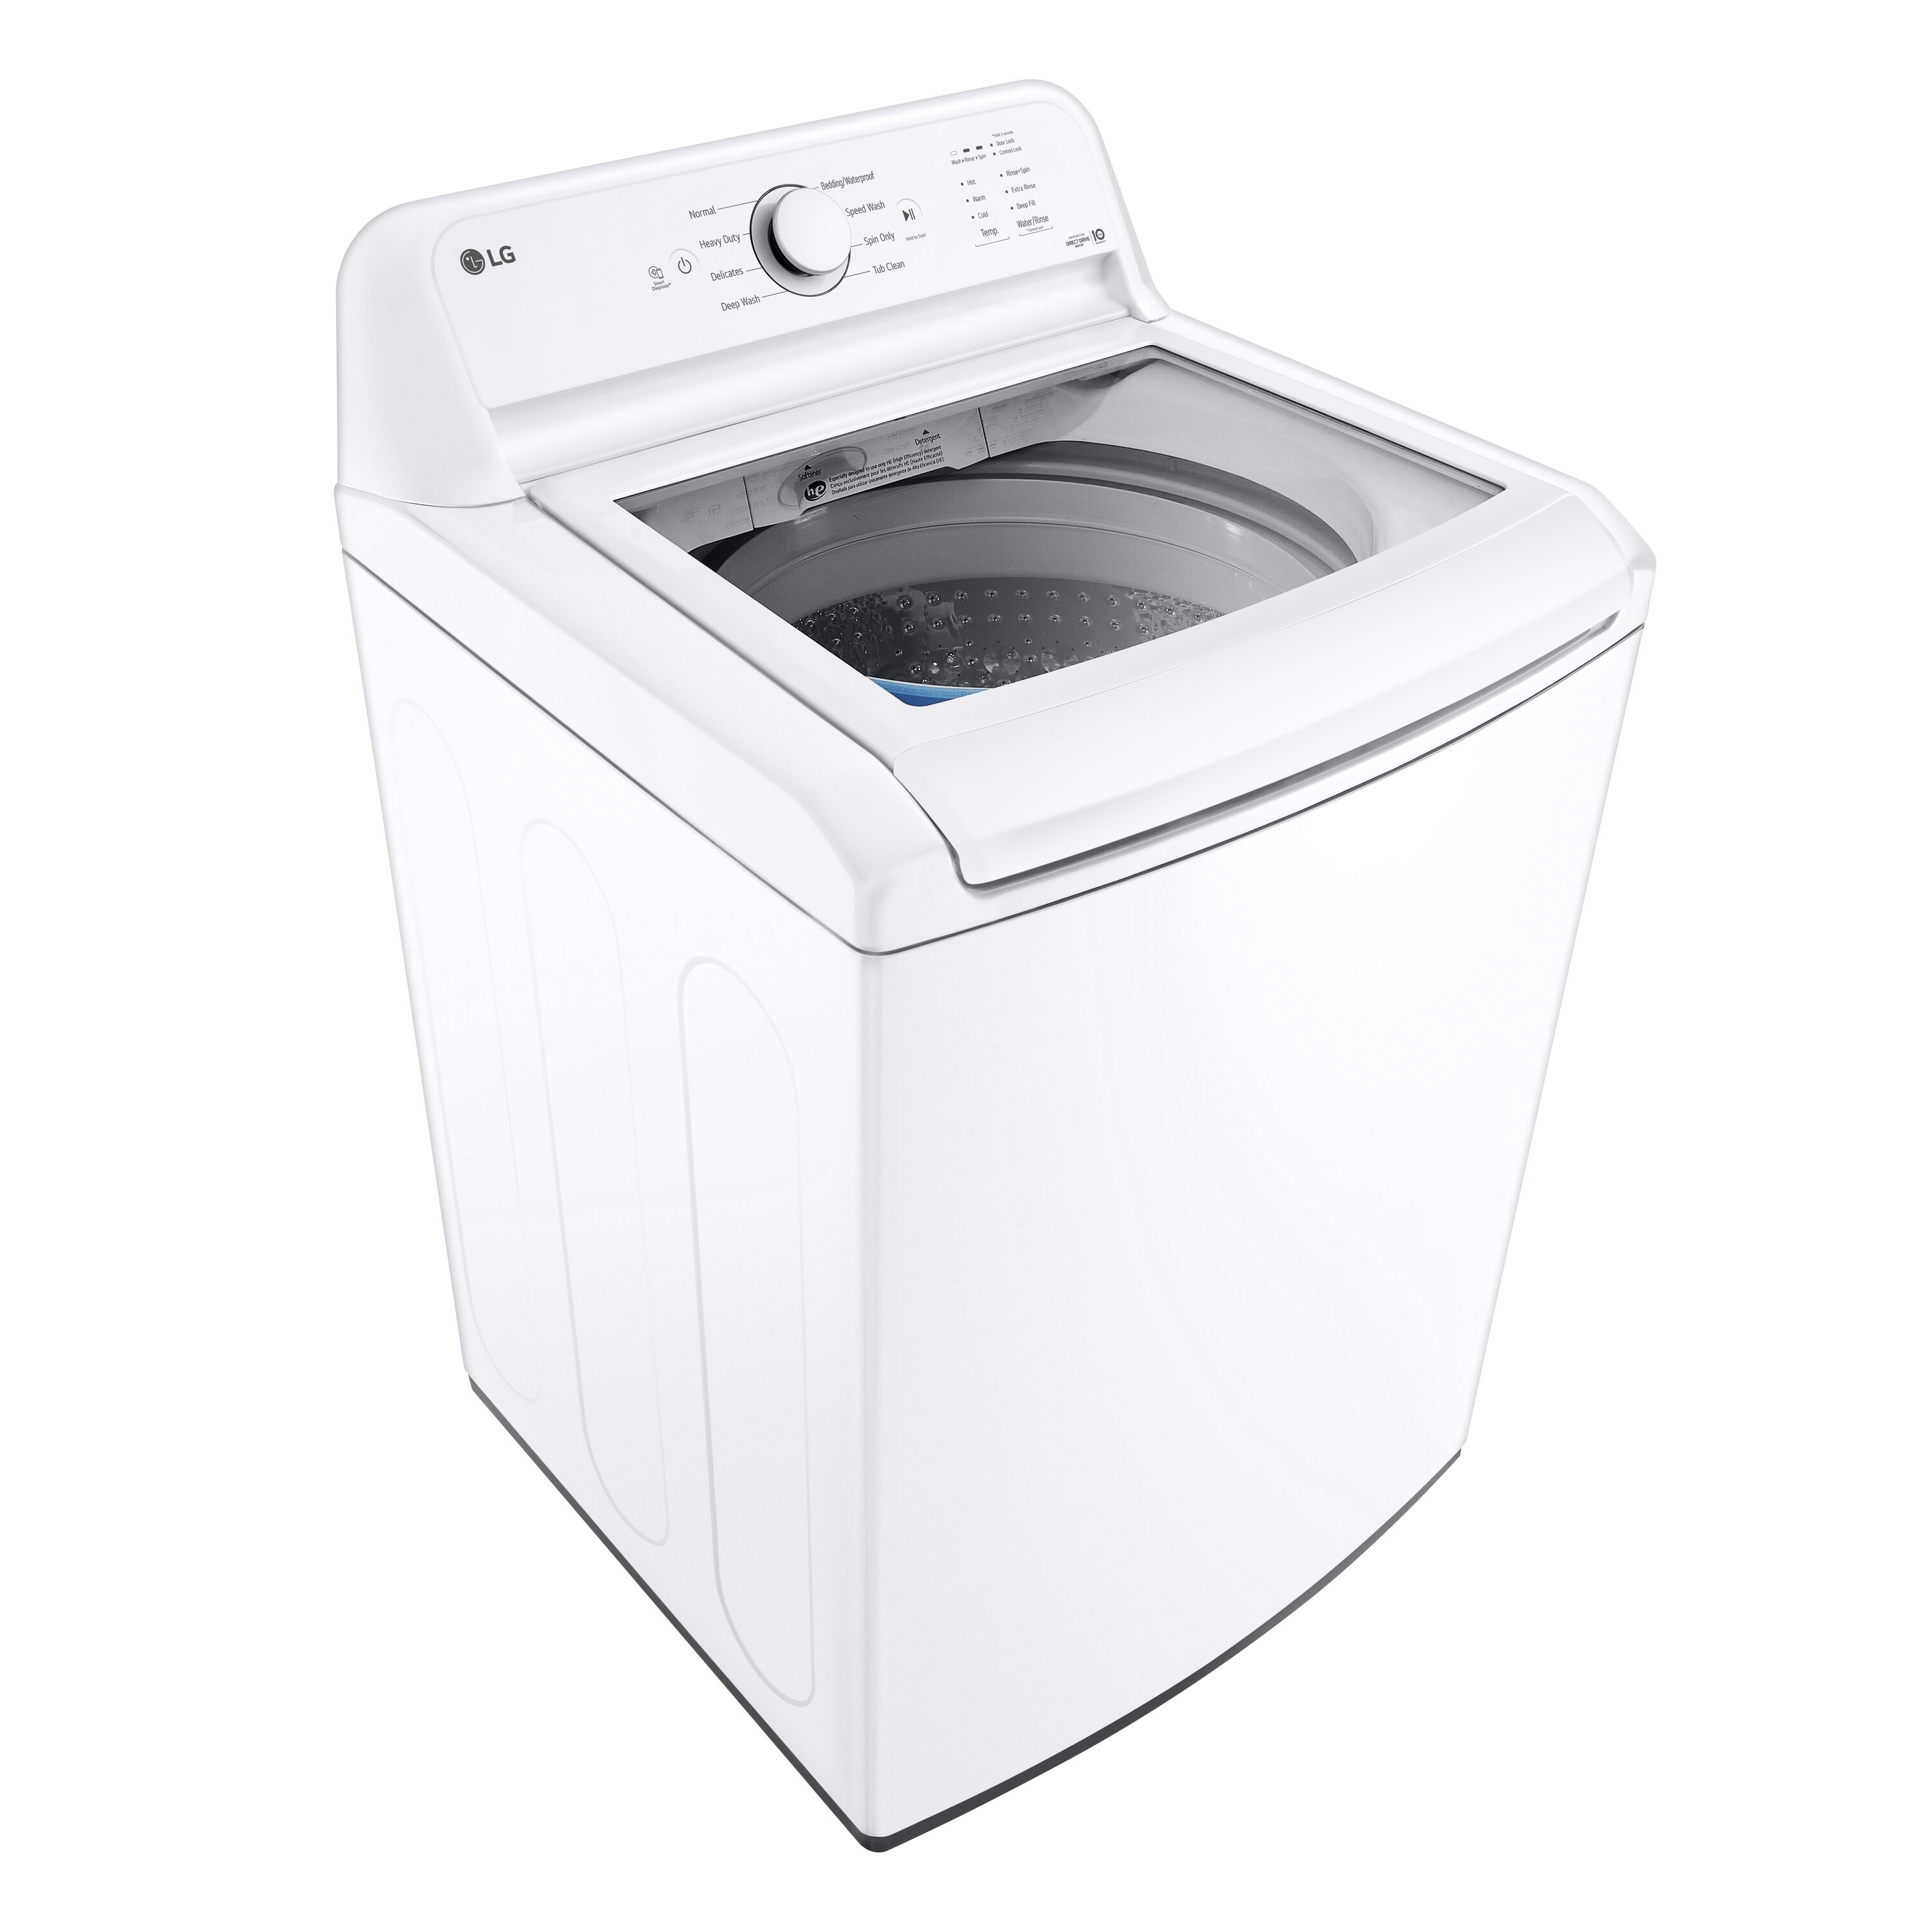 LG 4.1-cu Agitator Top-Load Washer (White) in Top-Load department at Lowes.com